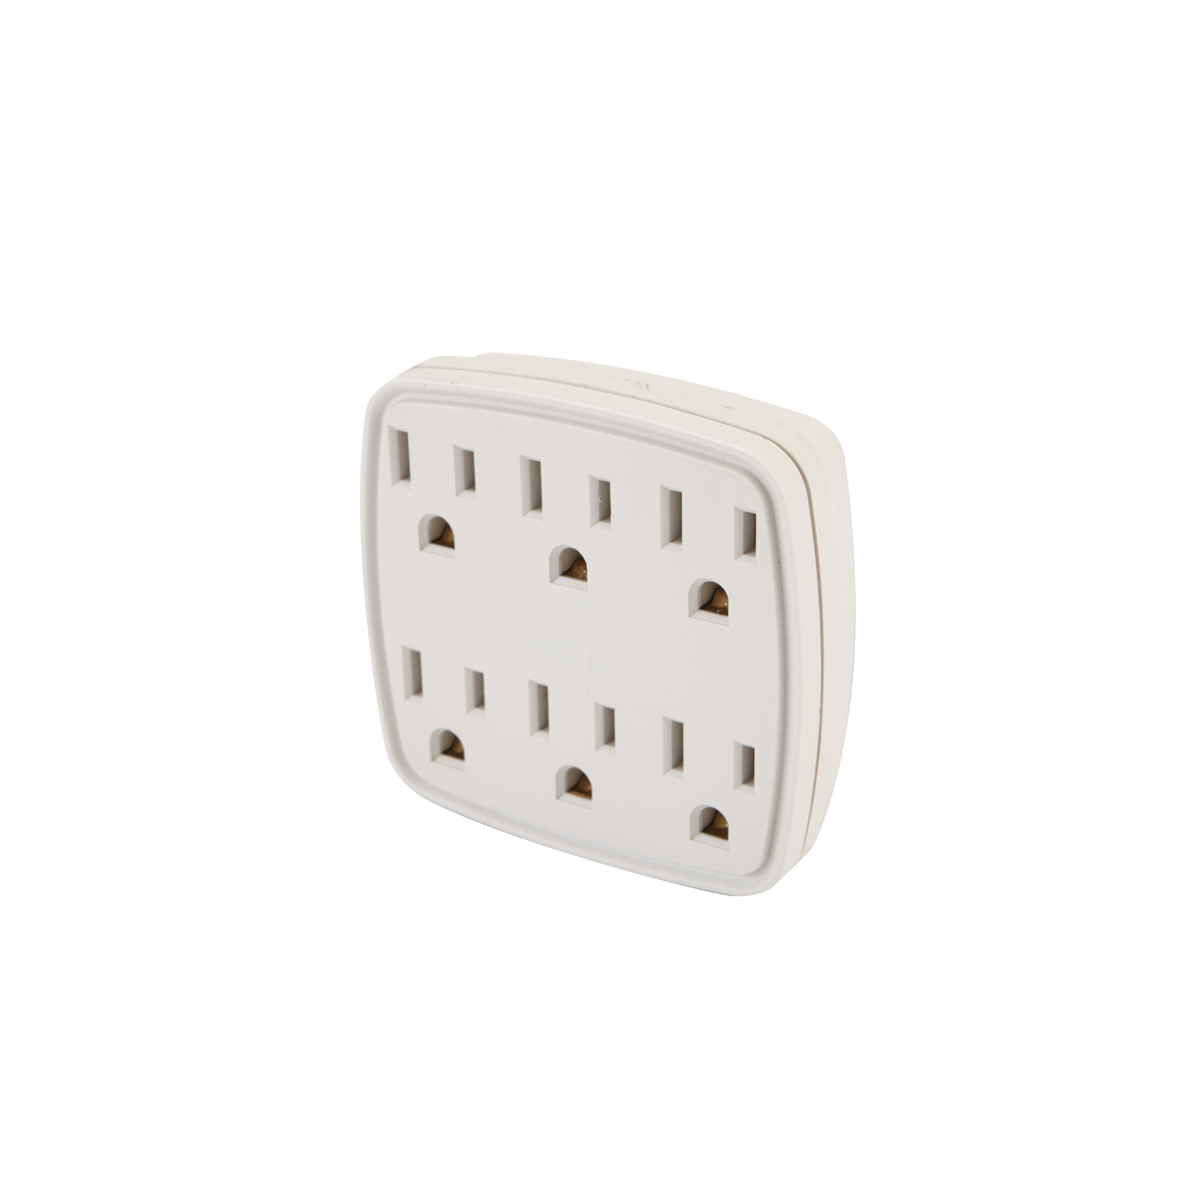 VANGUARD 6 Outlet Grounded Adapter - Item 61996 / 42894 / 66295